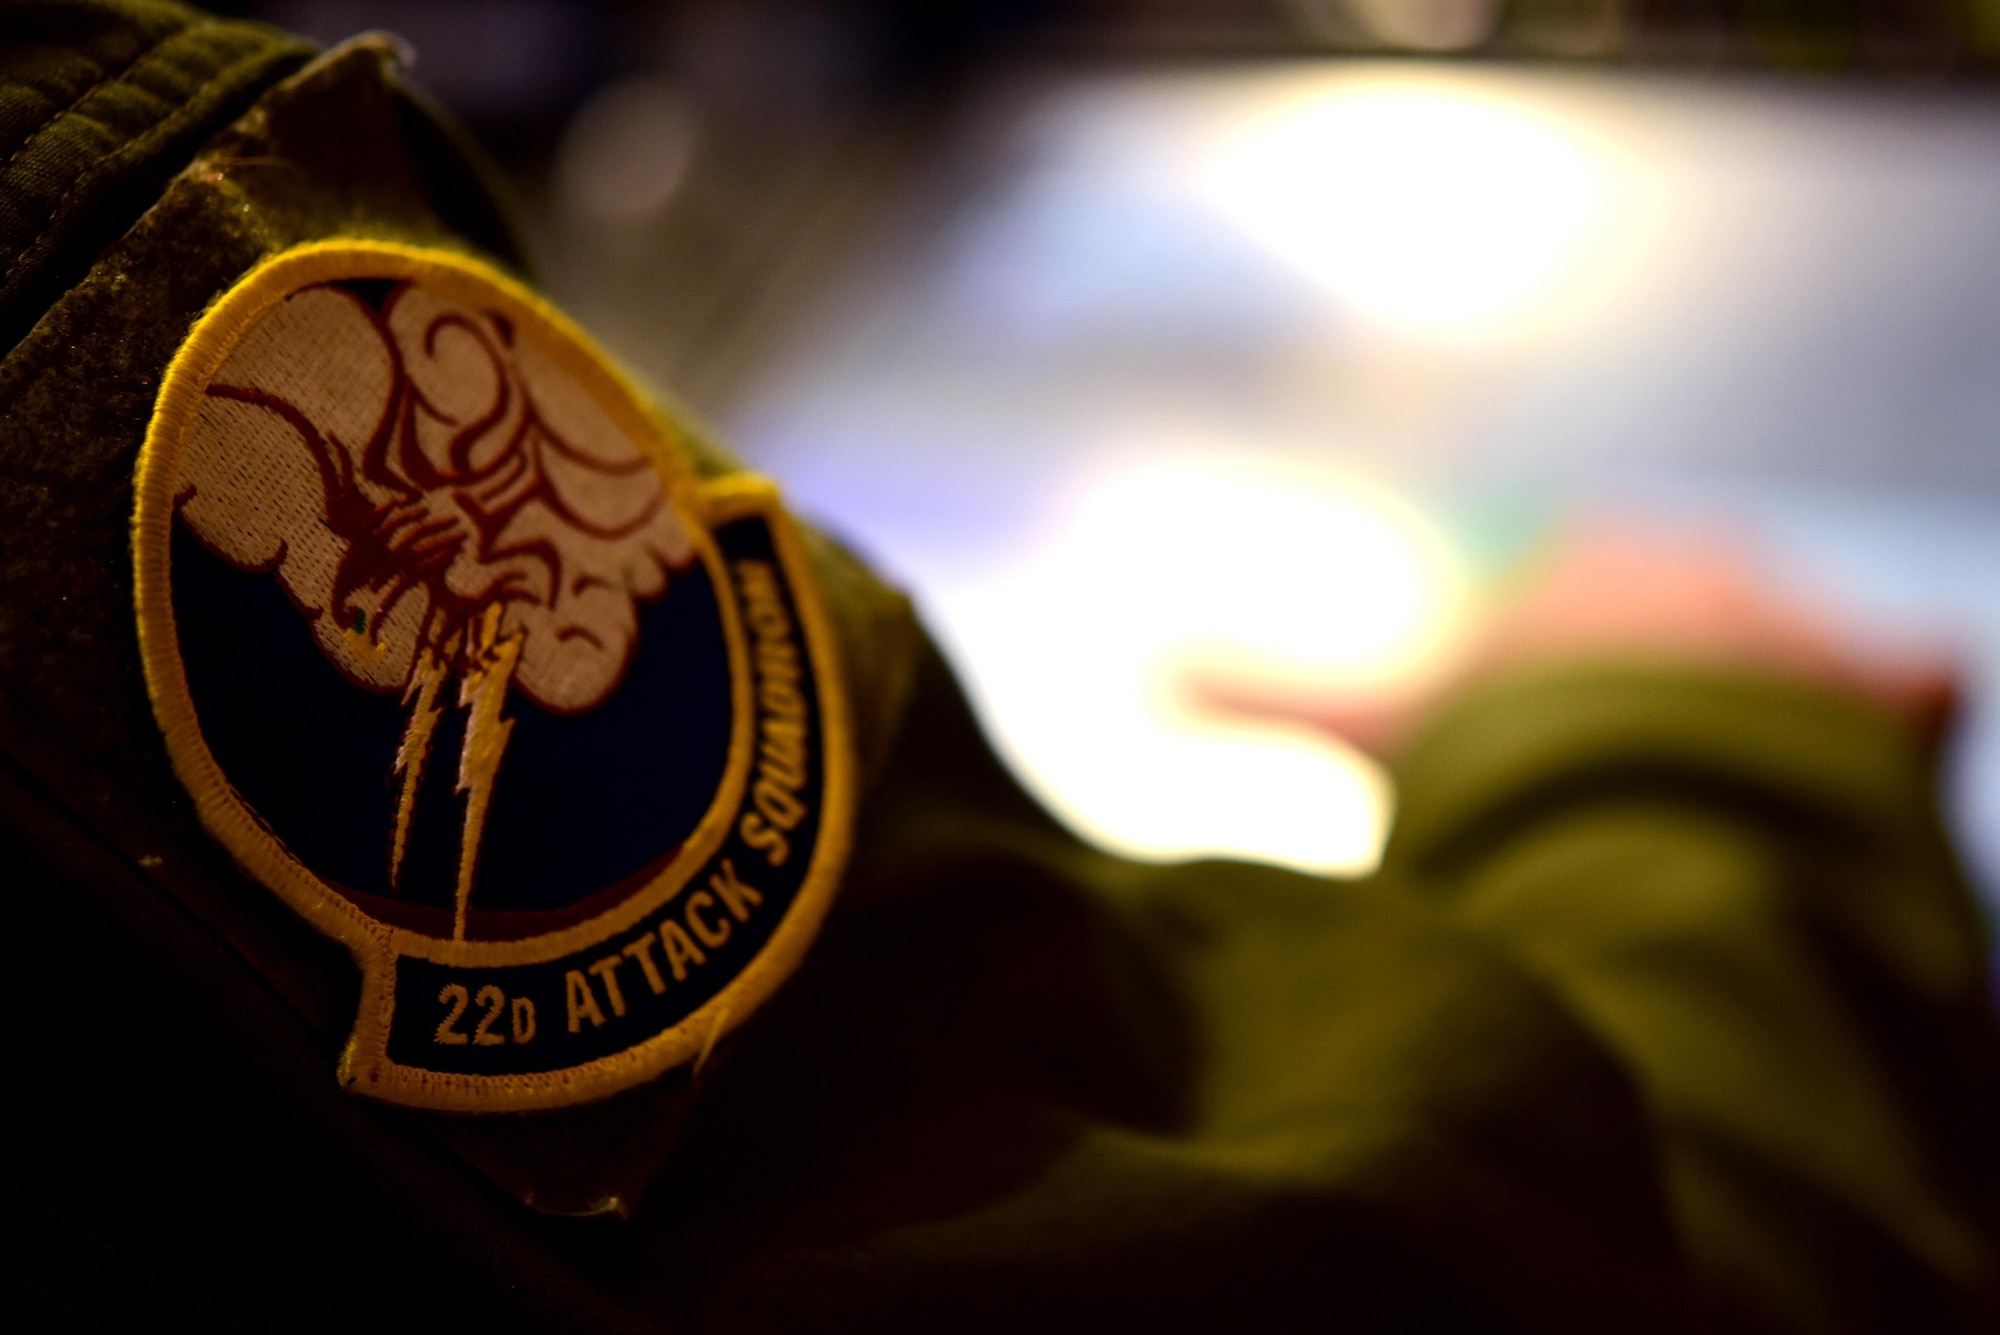 A 22nd Attack Squadron patch can be seen on the shoulder of an MQ-9 Reaper operator within a Ground Control Station at Creech Air Force Base, Nevada, April 15, 2020. The 22nd ATKS is one of several attack squadrons under the 432nd Wing/432nd Air Expeditionary Wing, a unit dedicated to 24/7 MQ-9 operations taking place around the world. (U.S. Air Force photo by Airman 1st Class William Rio Rosado)